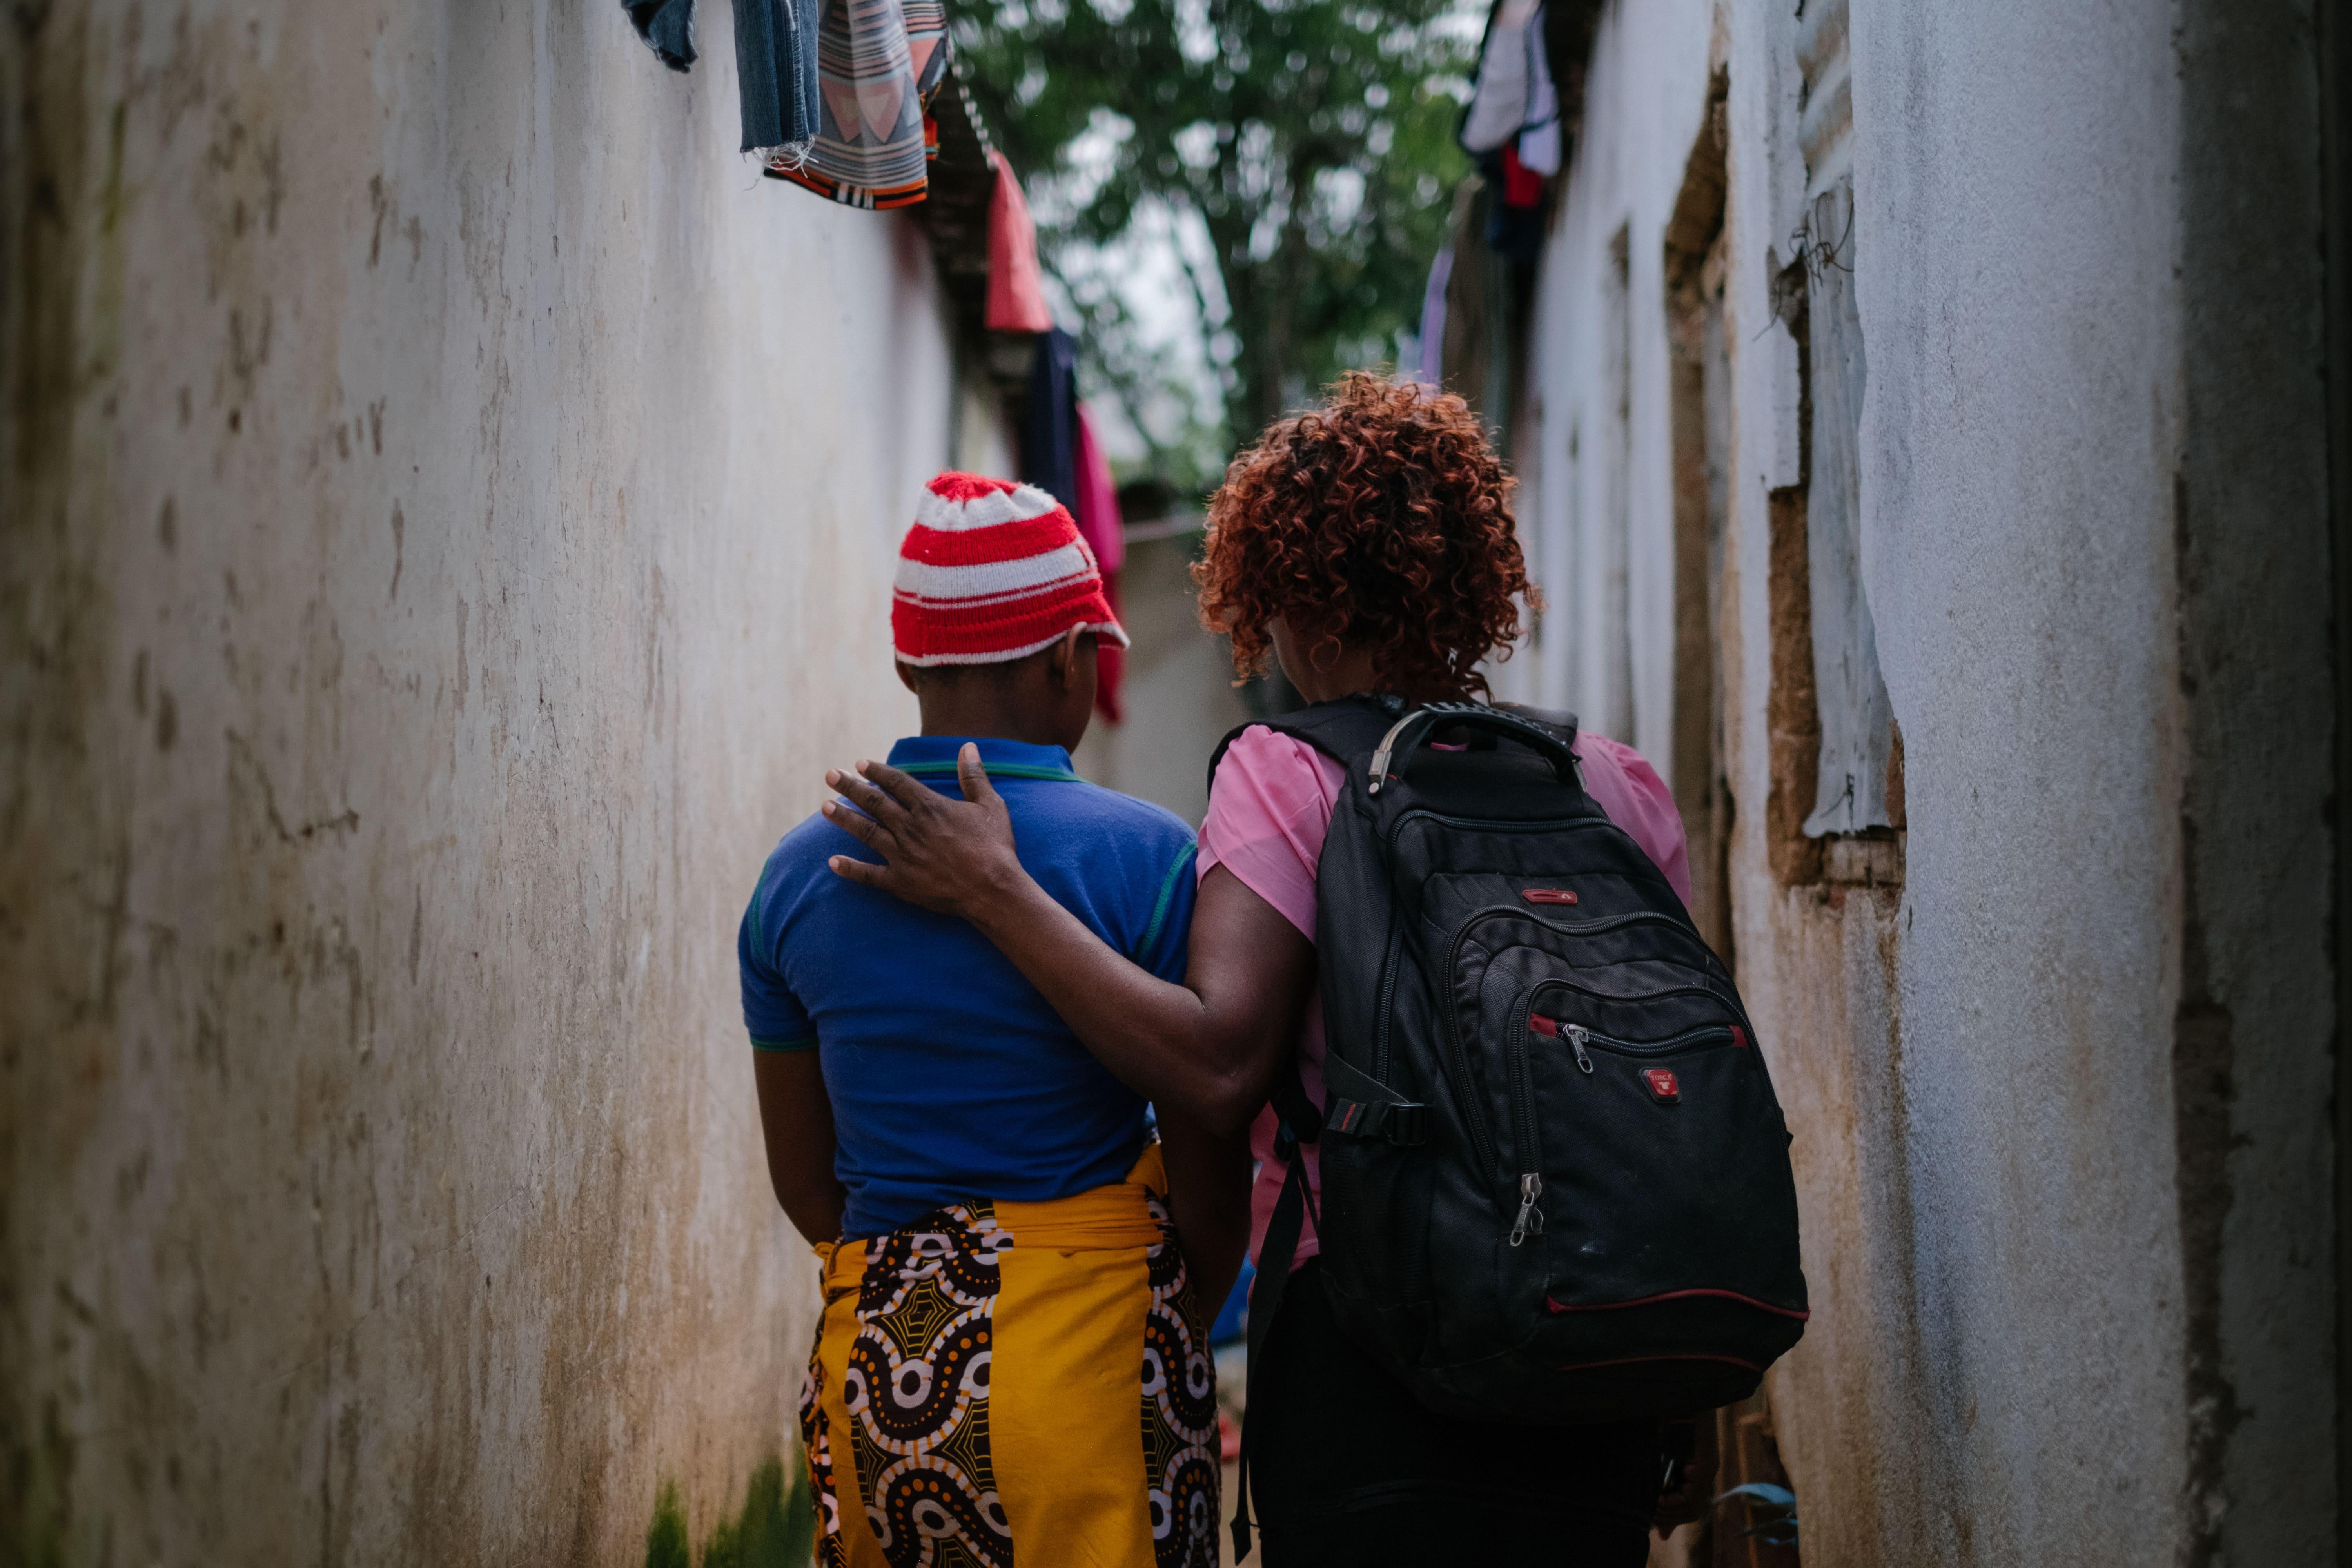 MSF community Health worker Rozi* interacting with one of the sex workers behind a bar hotspot in the centre of Mwanza town